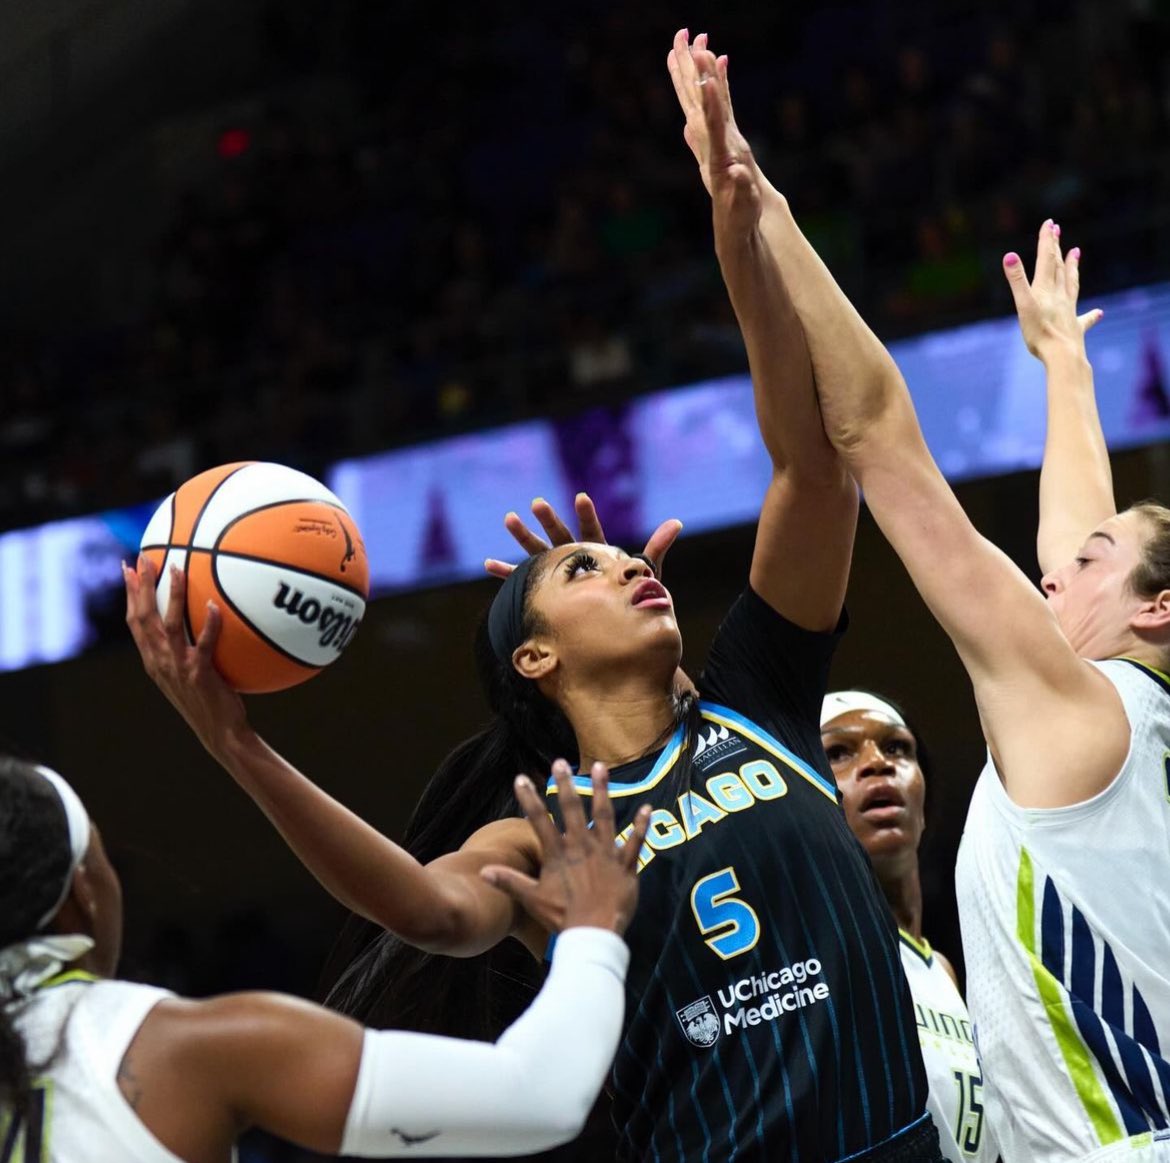 They out here complaining about Caitlin Clark getting double teamed. Shes not the only one. Angel Reese out here getting triple teamed in the paint. They ain’t showing her no mercy. And she is rising to the occasion. #wnba @Reese10Angel